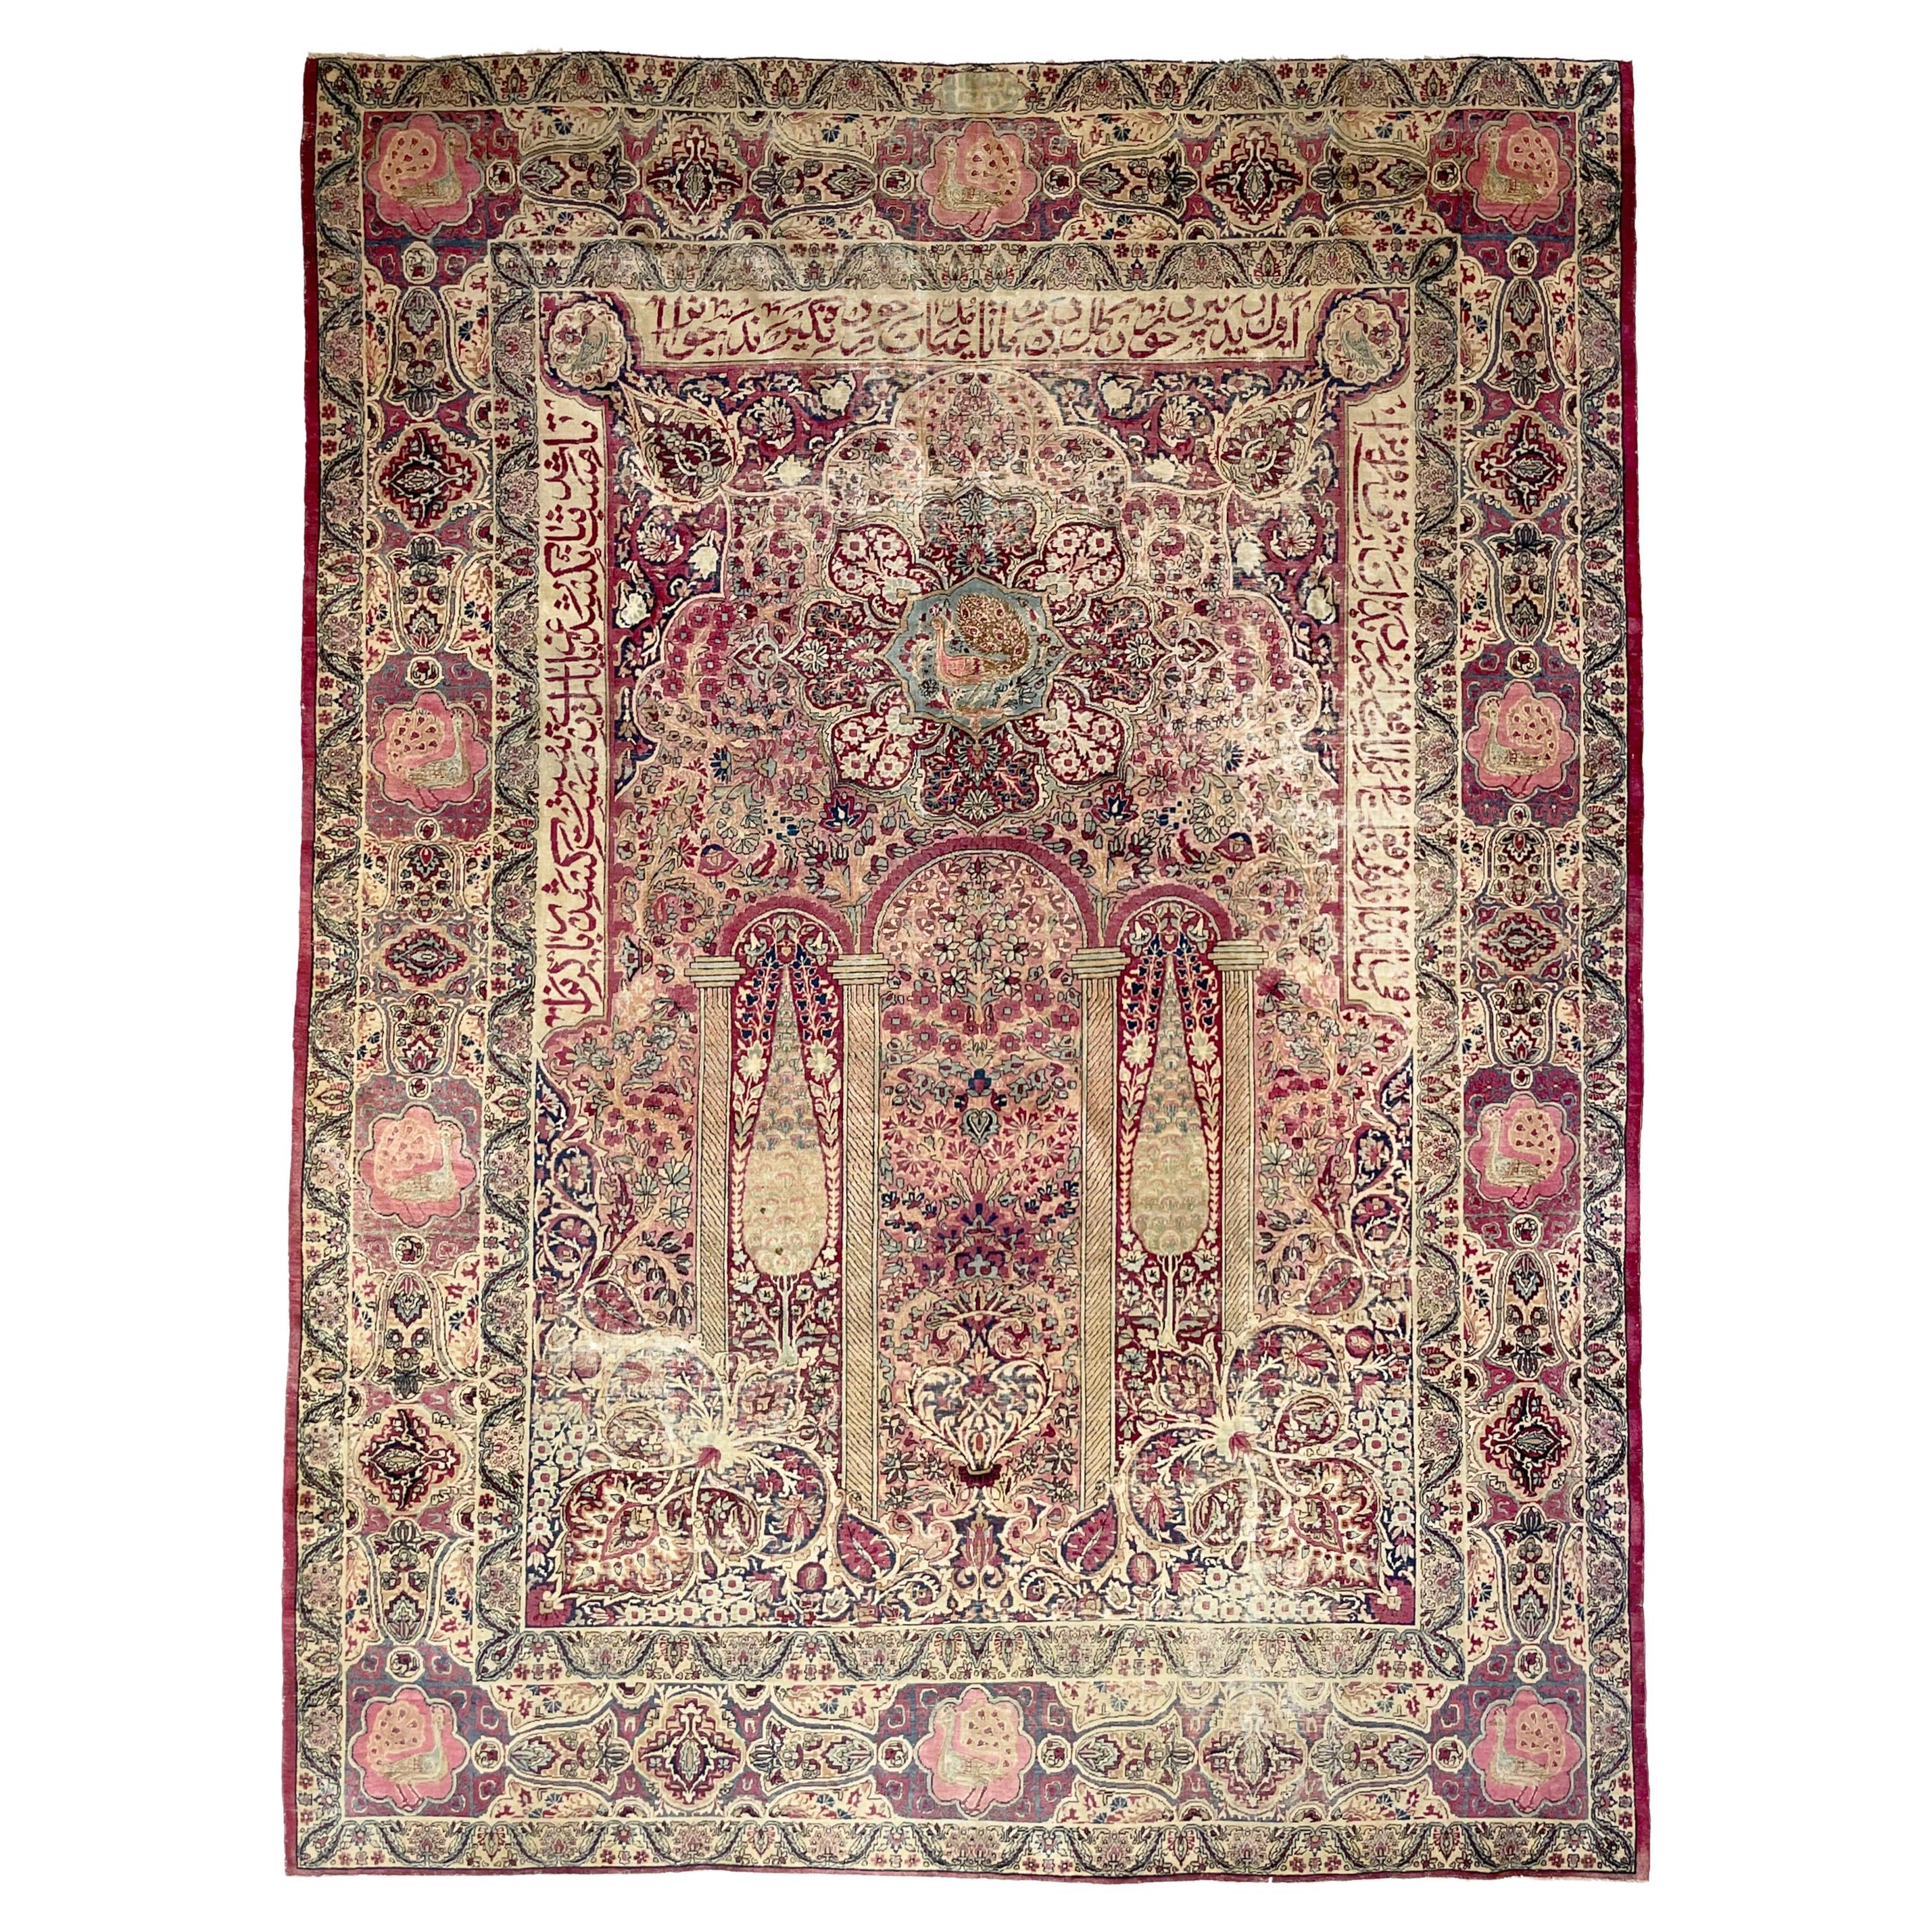 Collector's Royal Peacock Kerman Rug, c. 1900's For Sale